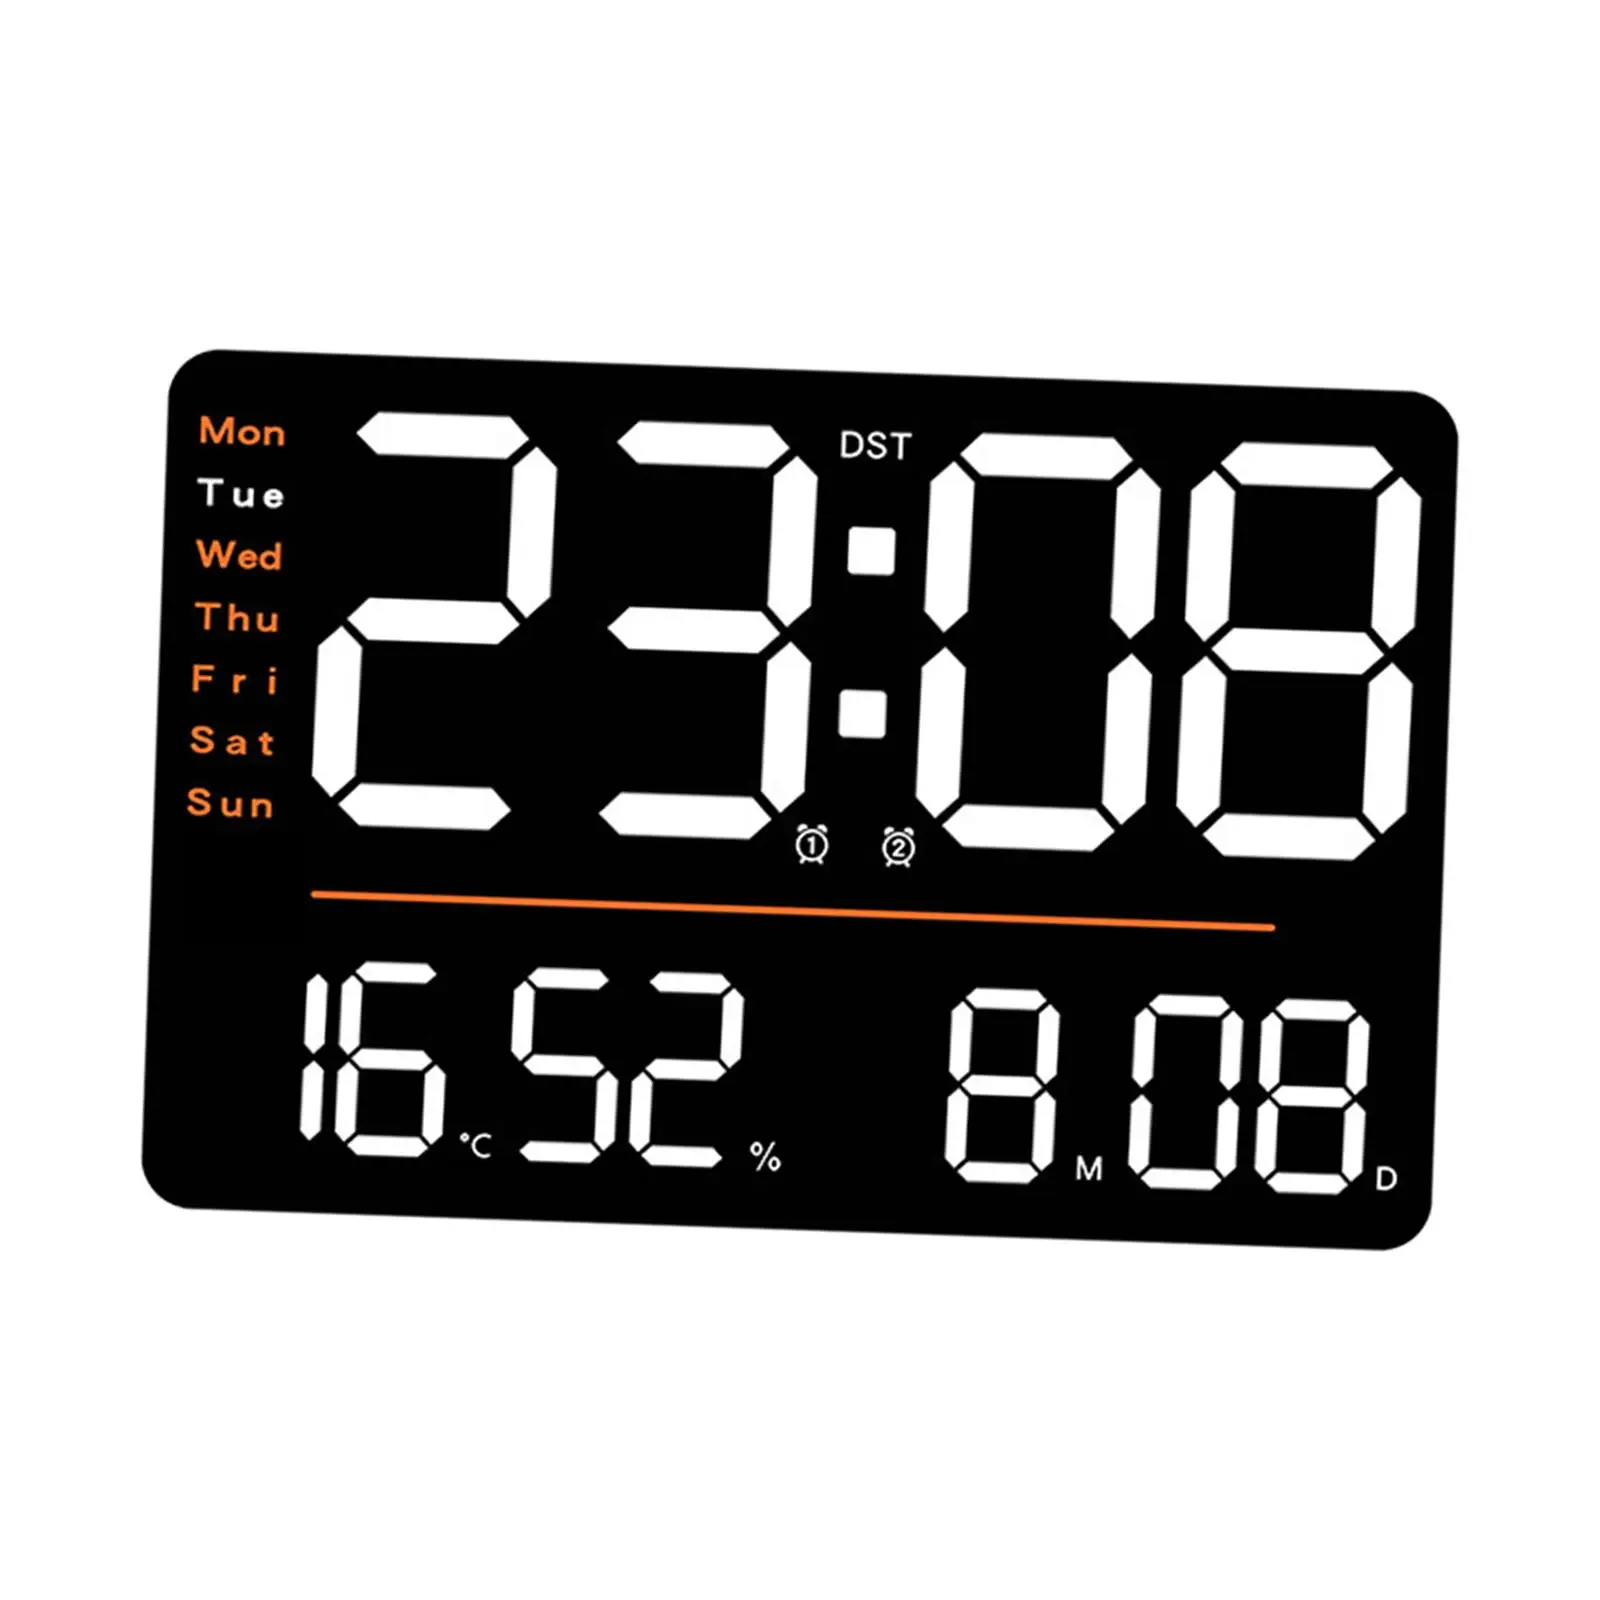 Large Digital Wall Clock 12/24H Time Mode Easy Installation Remote Control with Timer with Date for Office Kitchen Bedroom Home